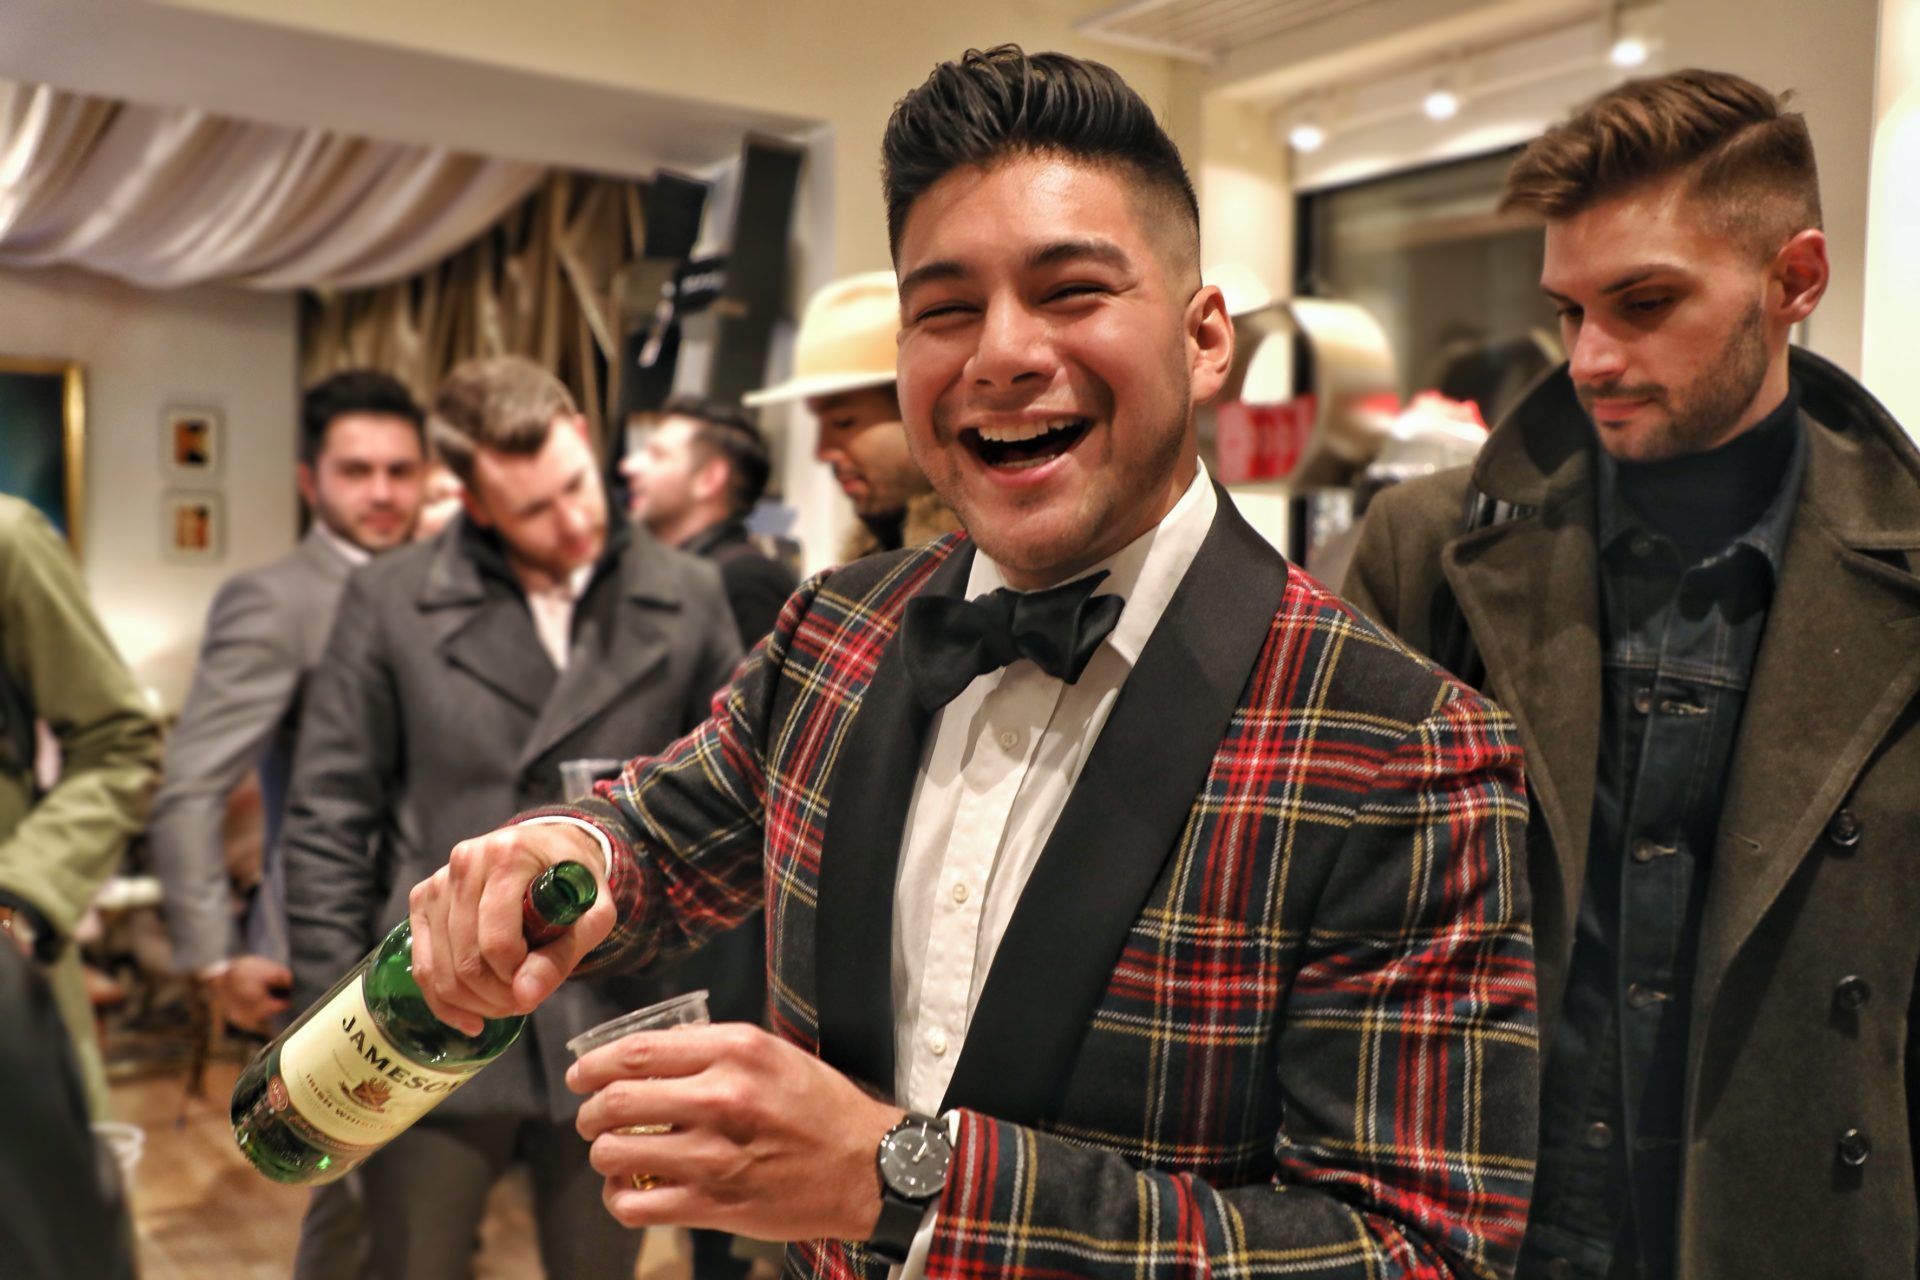 EVENT: MENSWEAR SIP & SOIREE AT TASTE COLLECTION